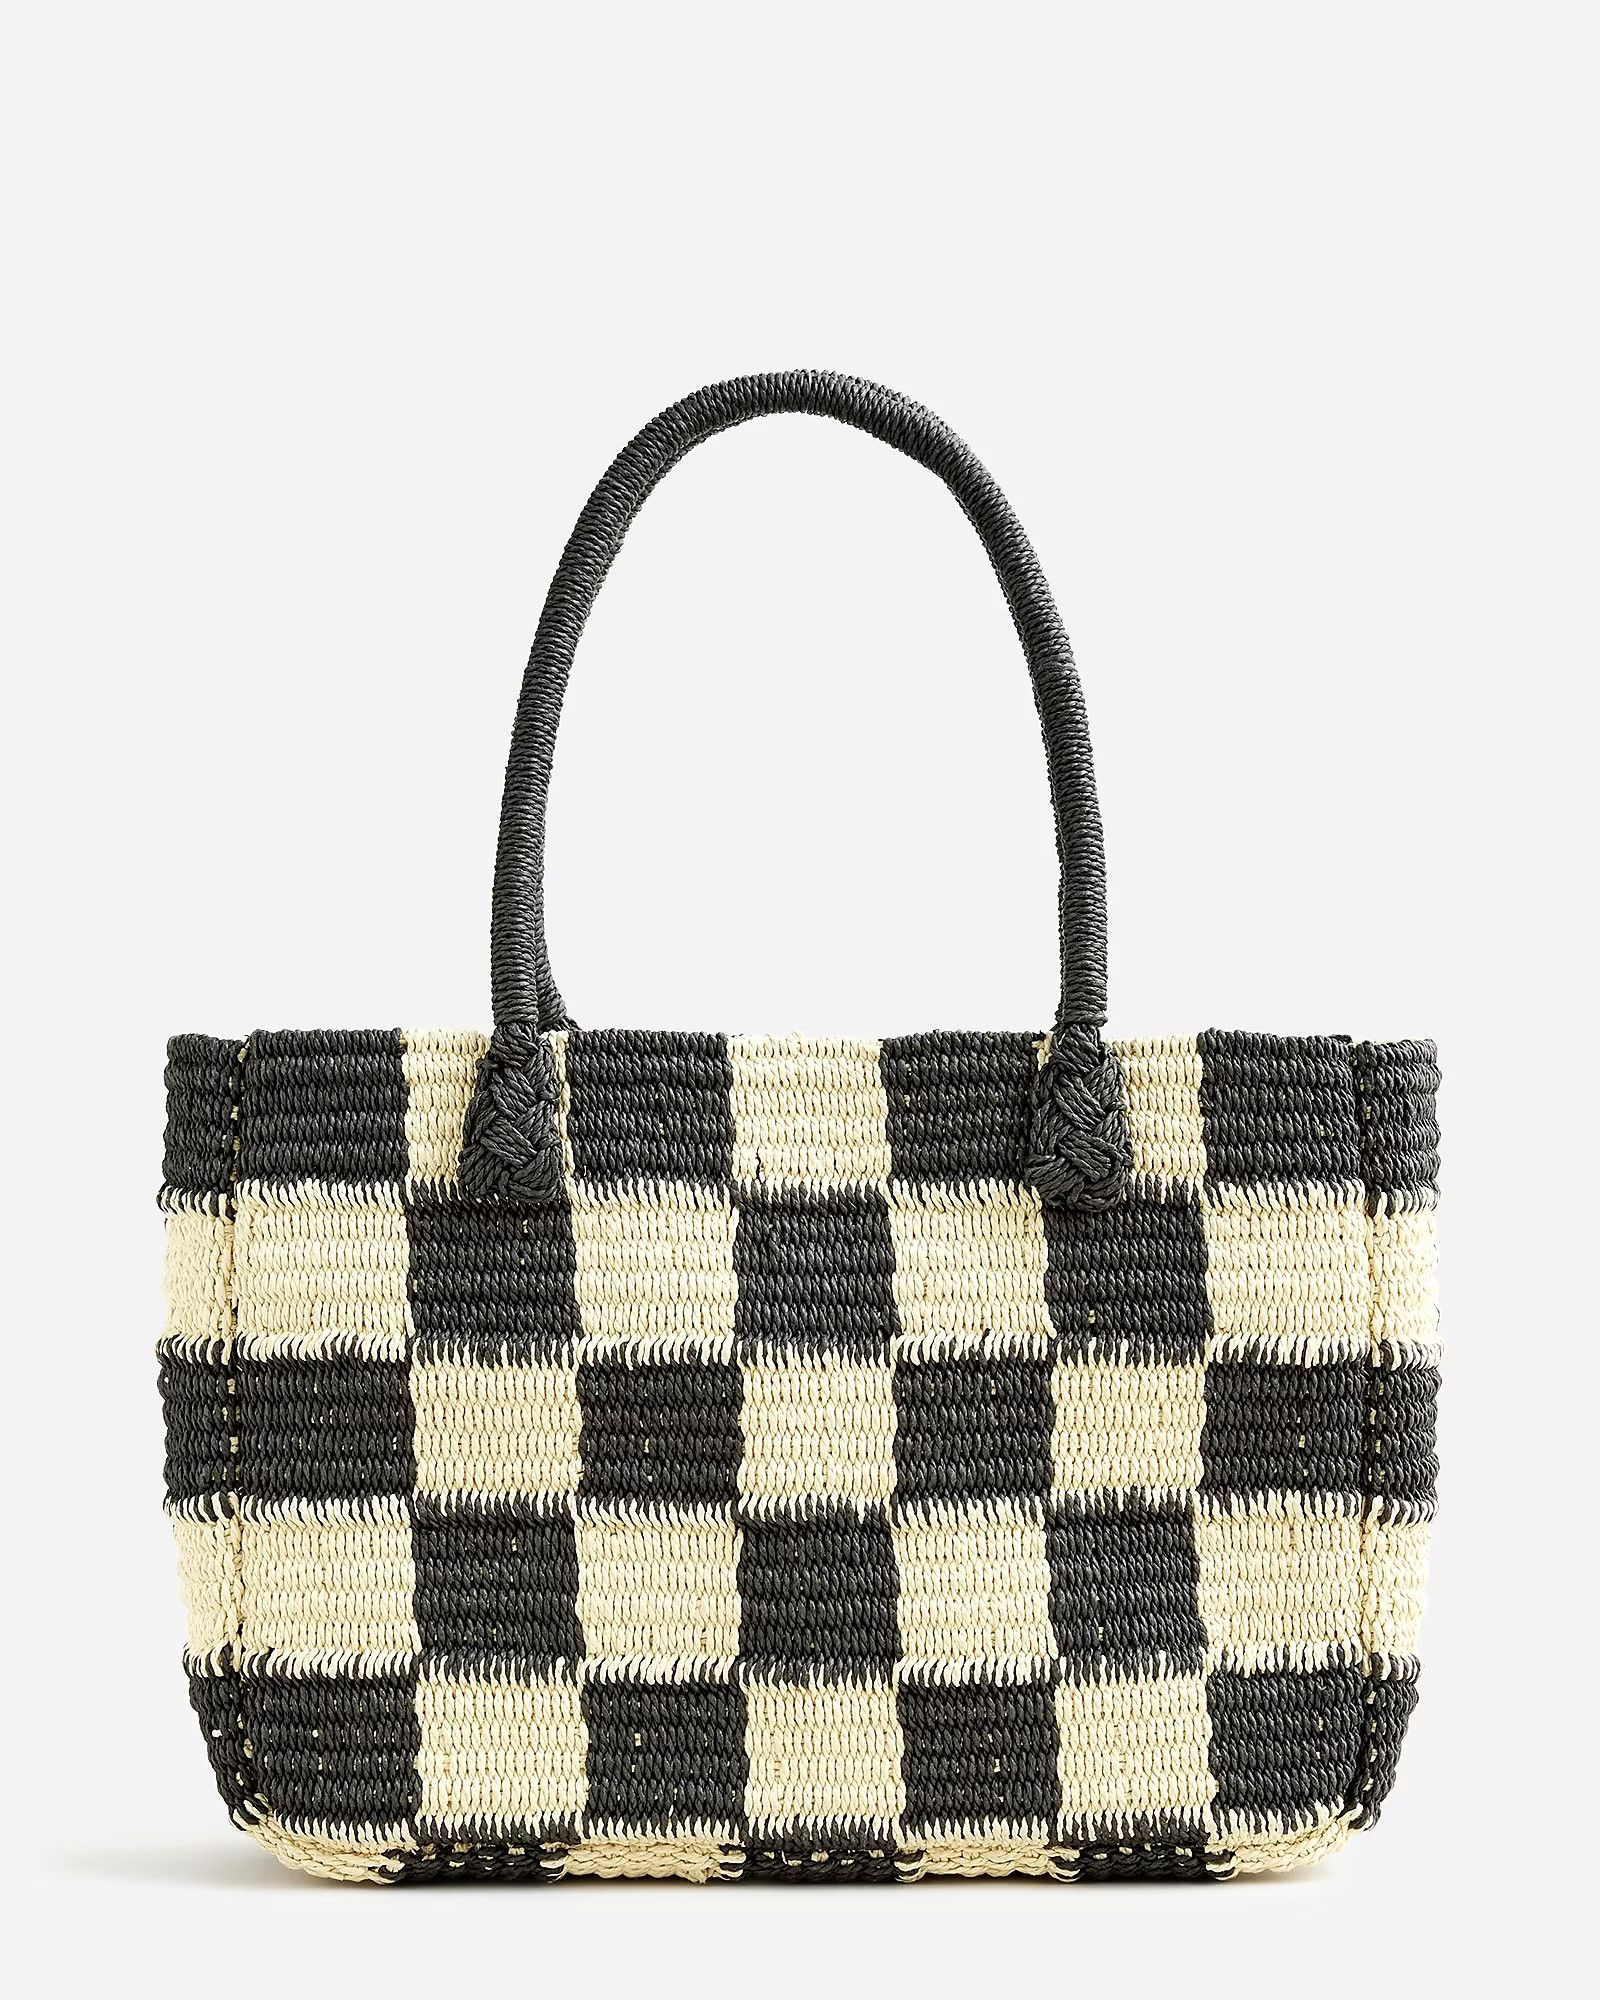 Marseille tote in gingham straw | J.Crew US